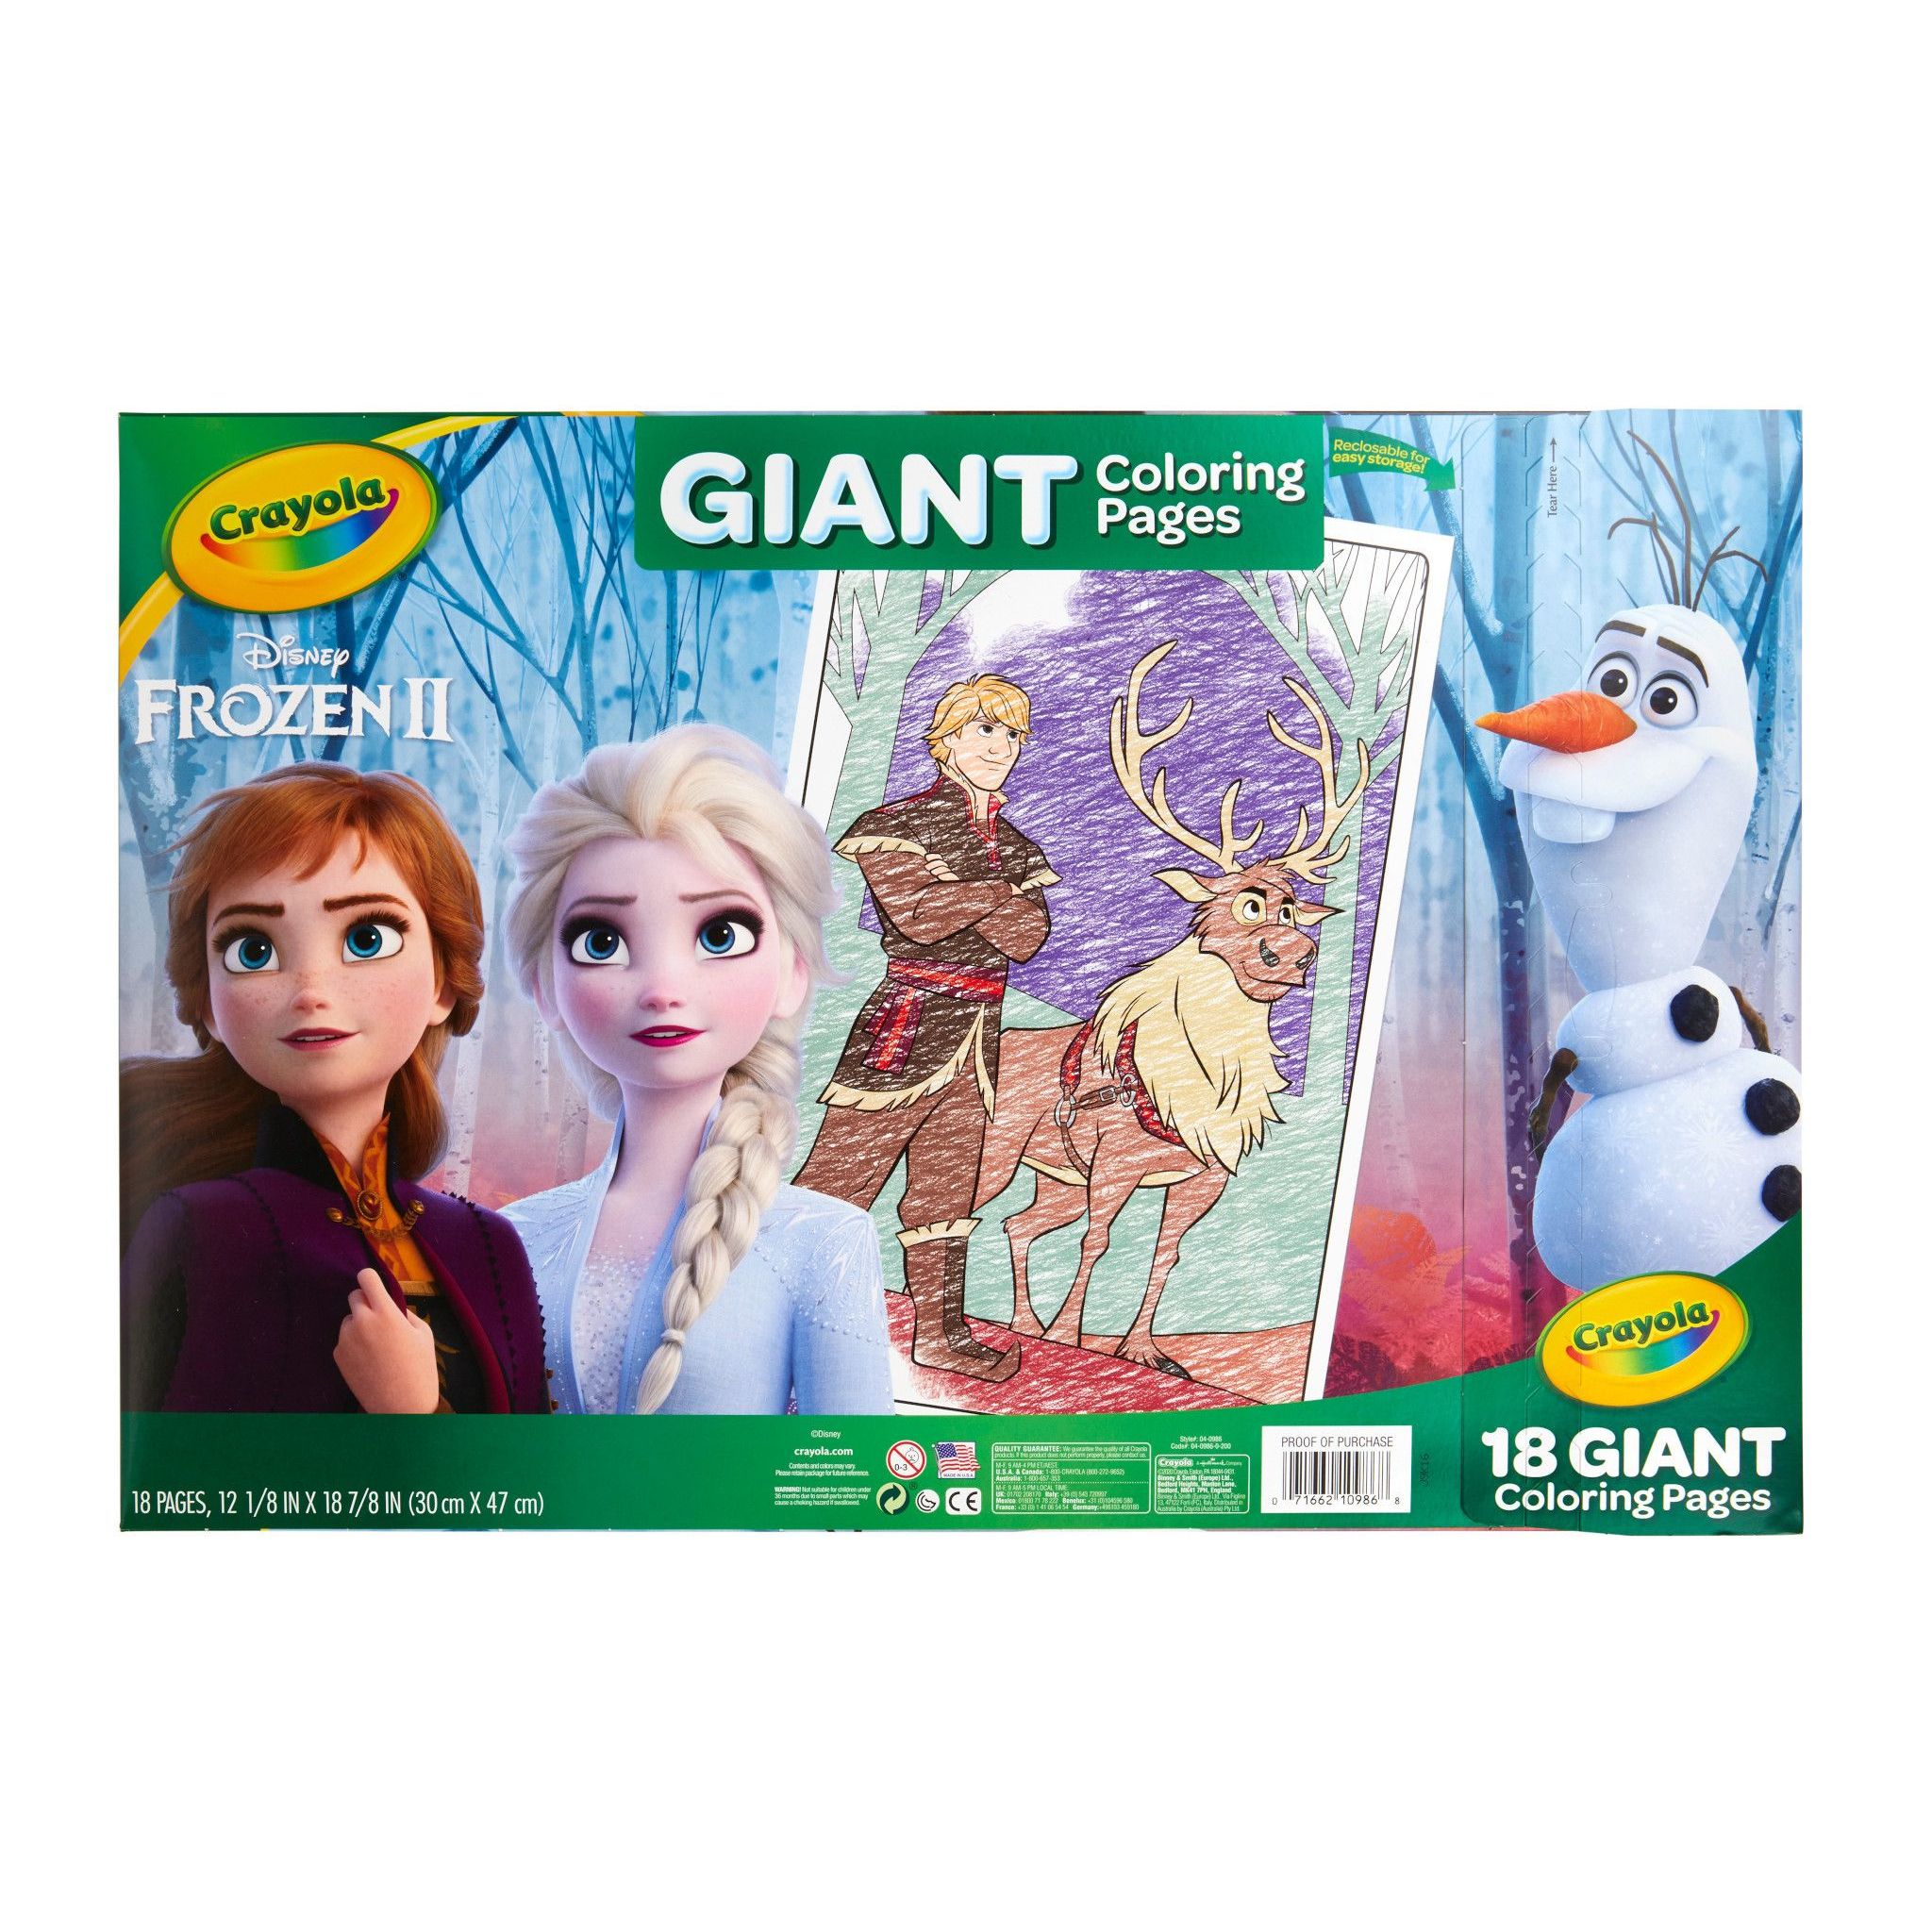 Crayola Giant Coloring Featuring Frozen 2, School Supplies, Child, 18 Pages - image 5 of 5